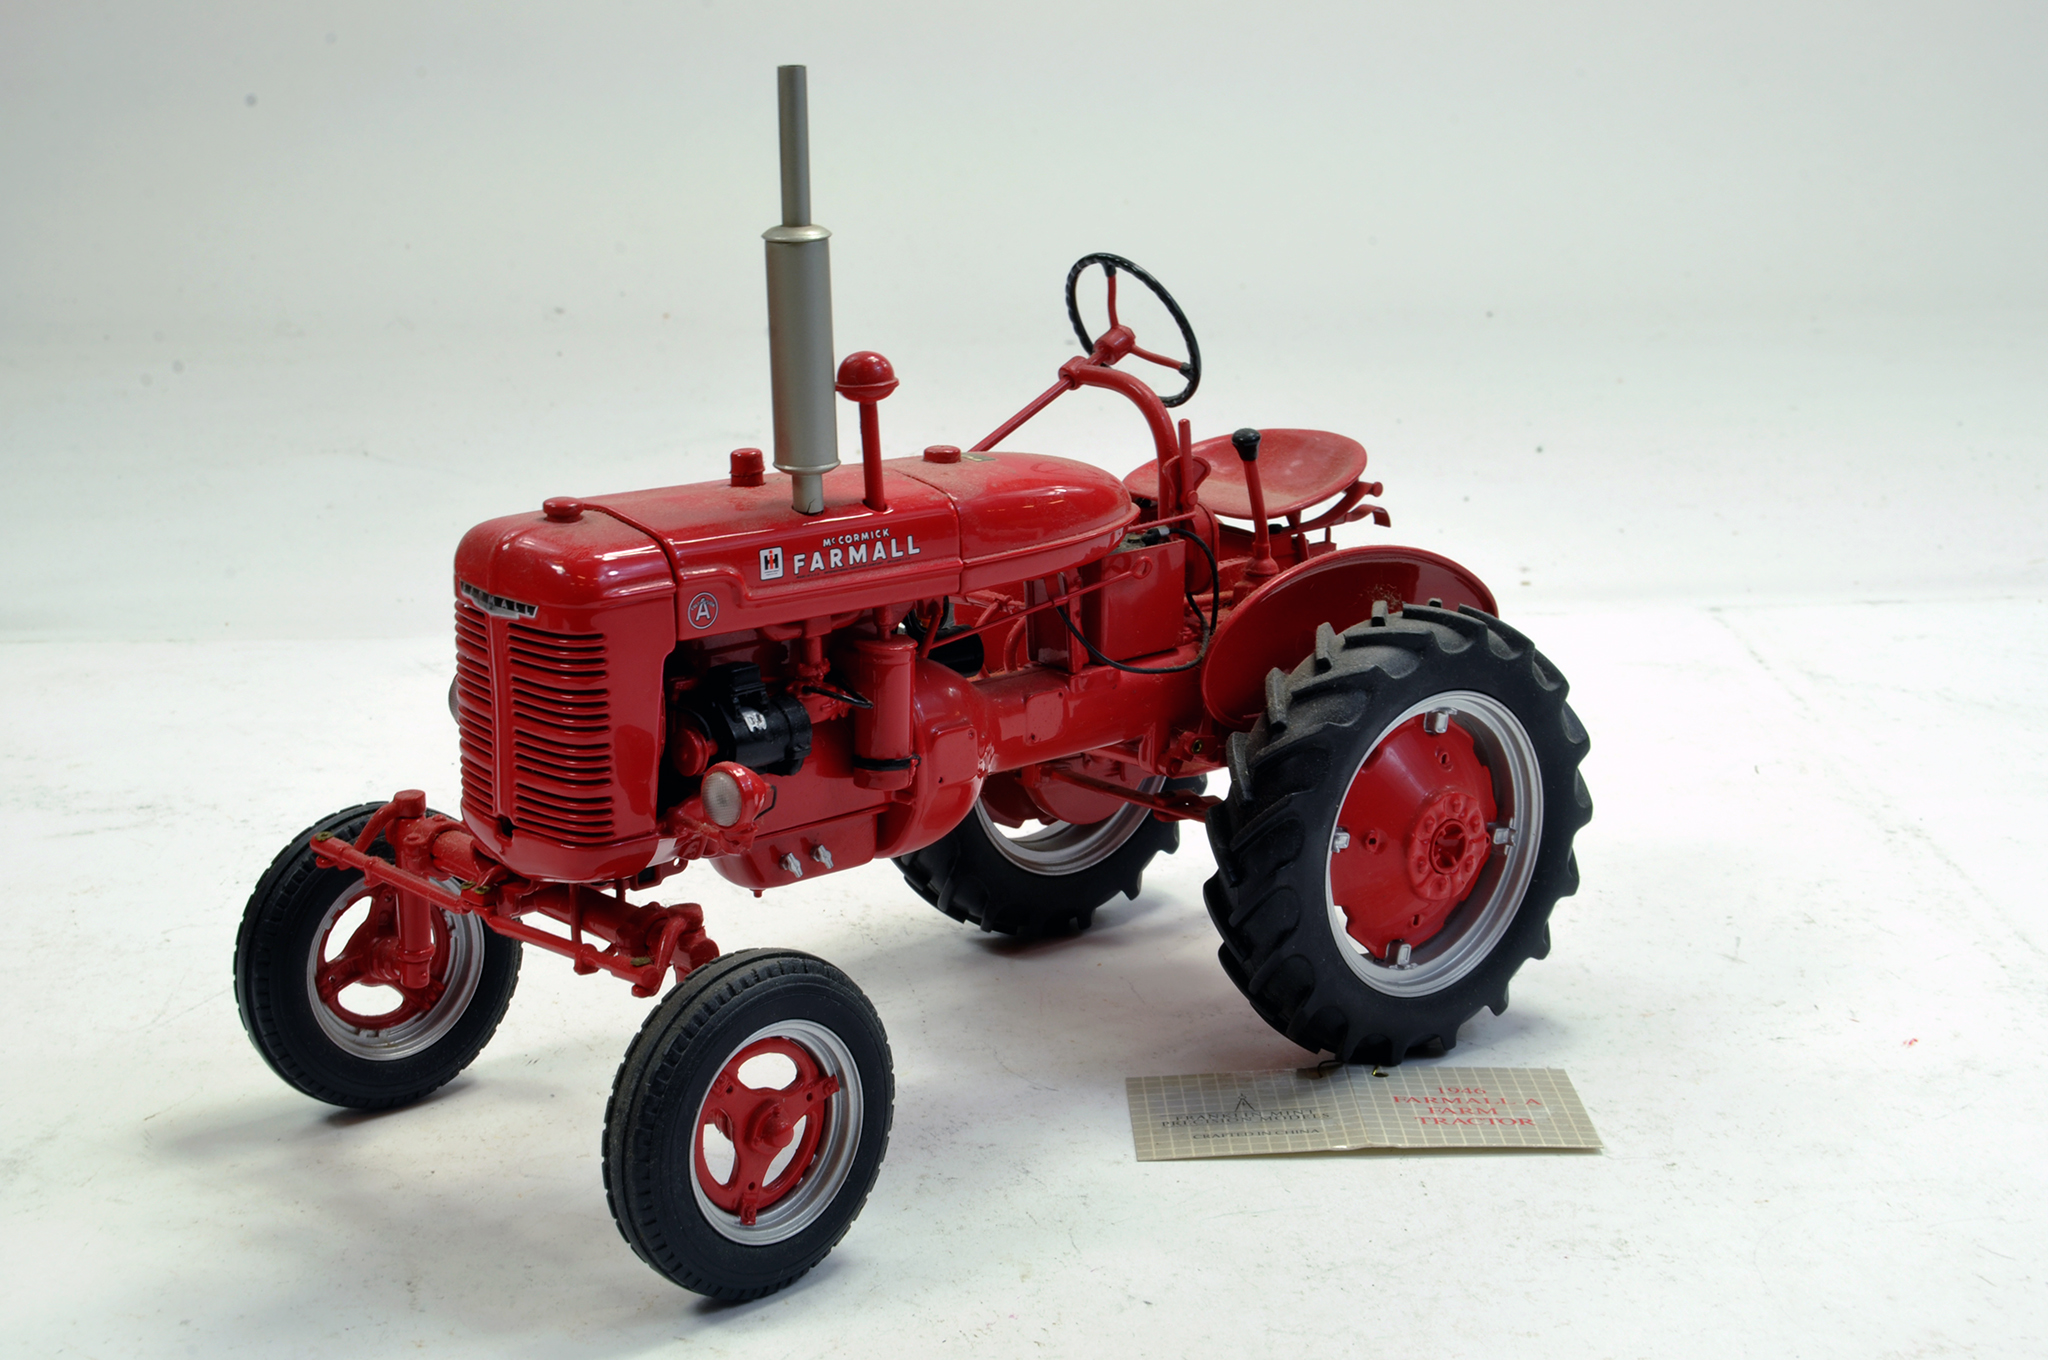 Franklin Mint 1/12 Farmall A Tractor Precision Detail. No Box/Boxes but complete and excellent. No